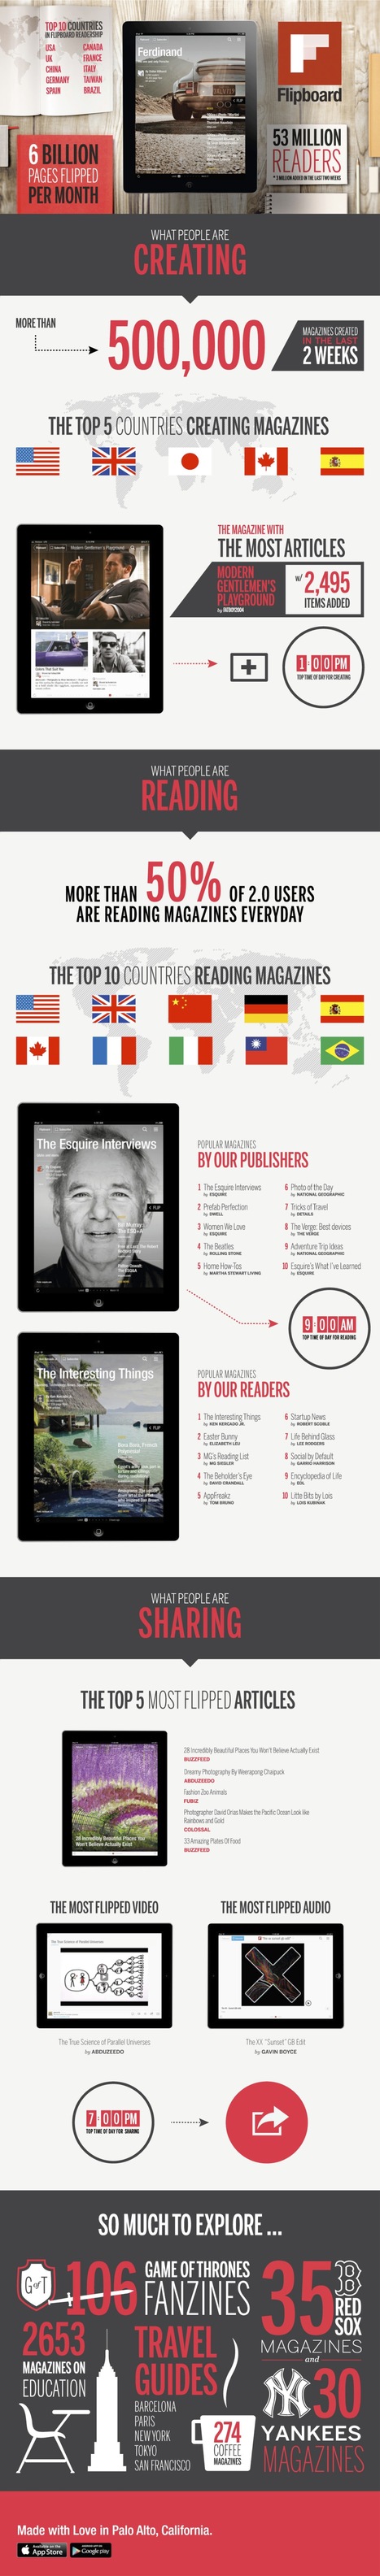 The State of Flipboard and Rise of Mobile Curation | Dashburst | World's Best Infographics | Scoop.it